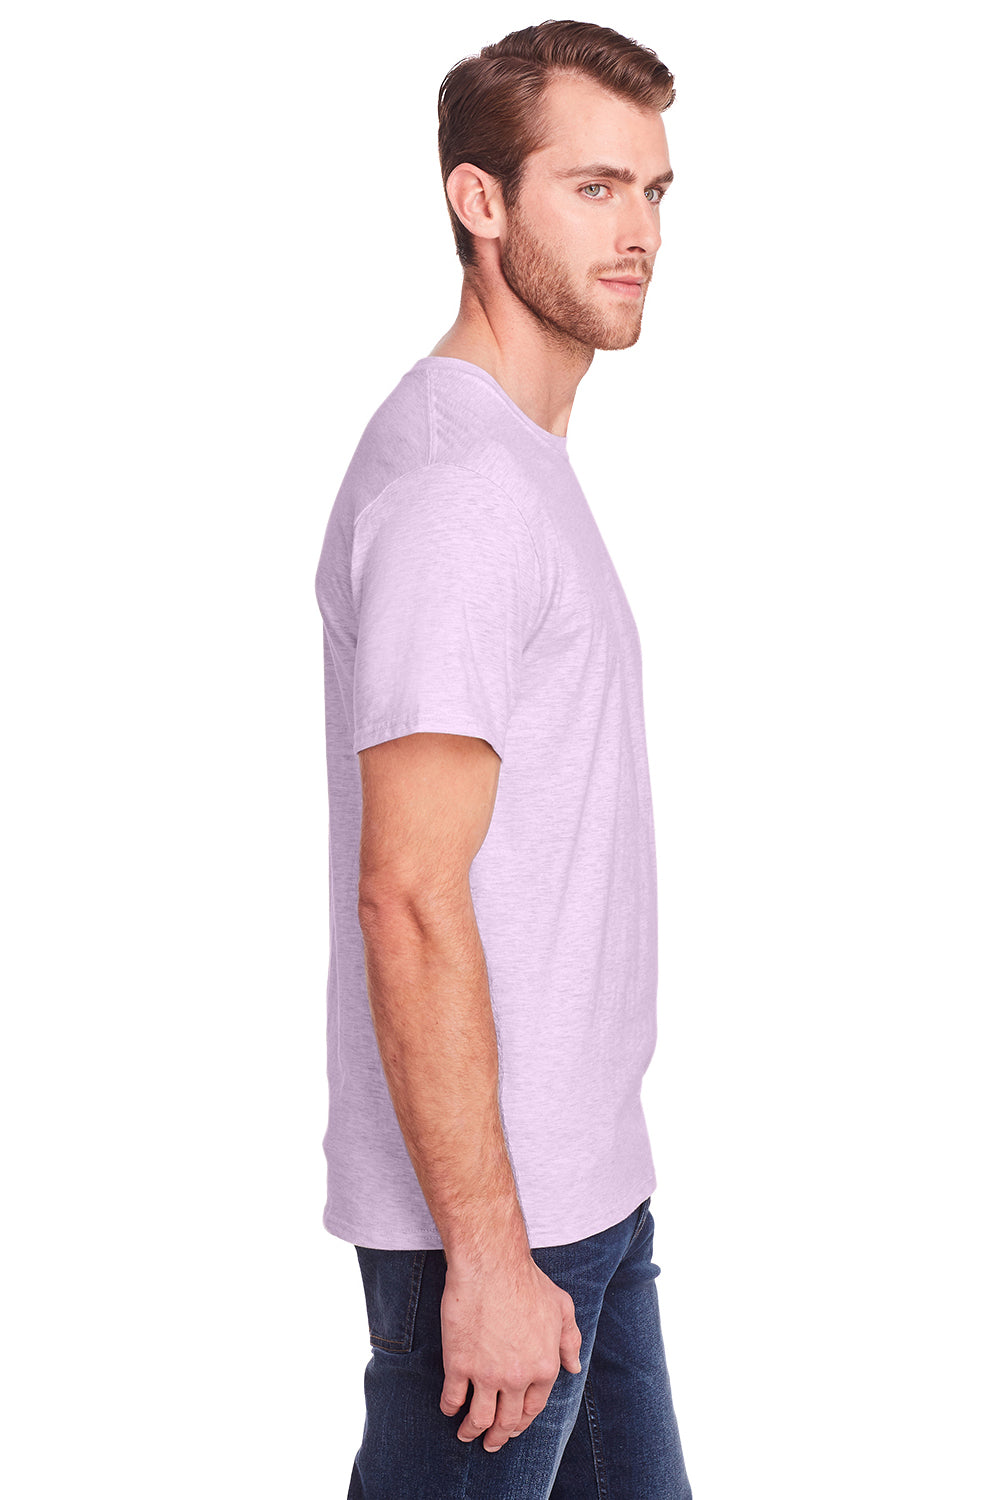 Fruit Of The Loom IC47MR Mens Iconic Short Sleeve Crewneck T-Shirt Heather Pink Side